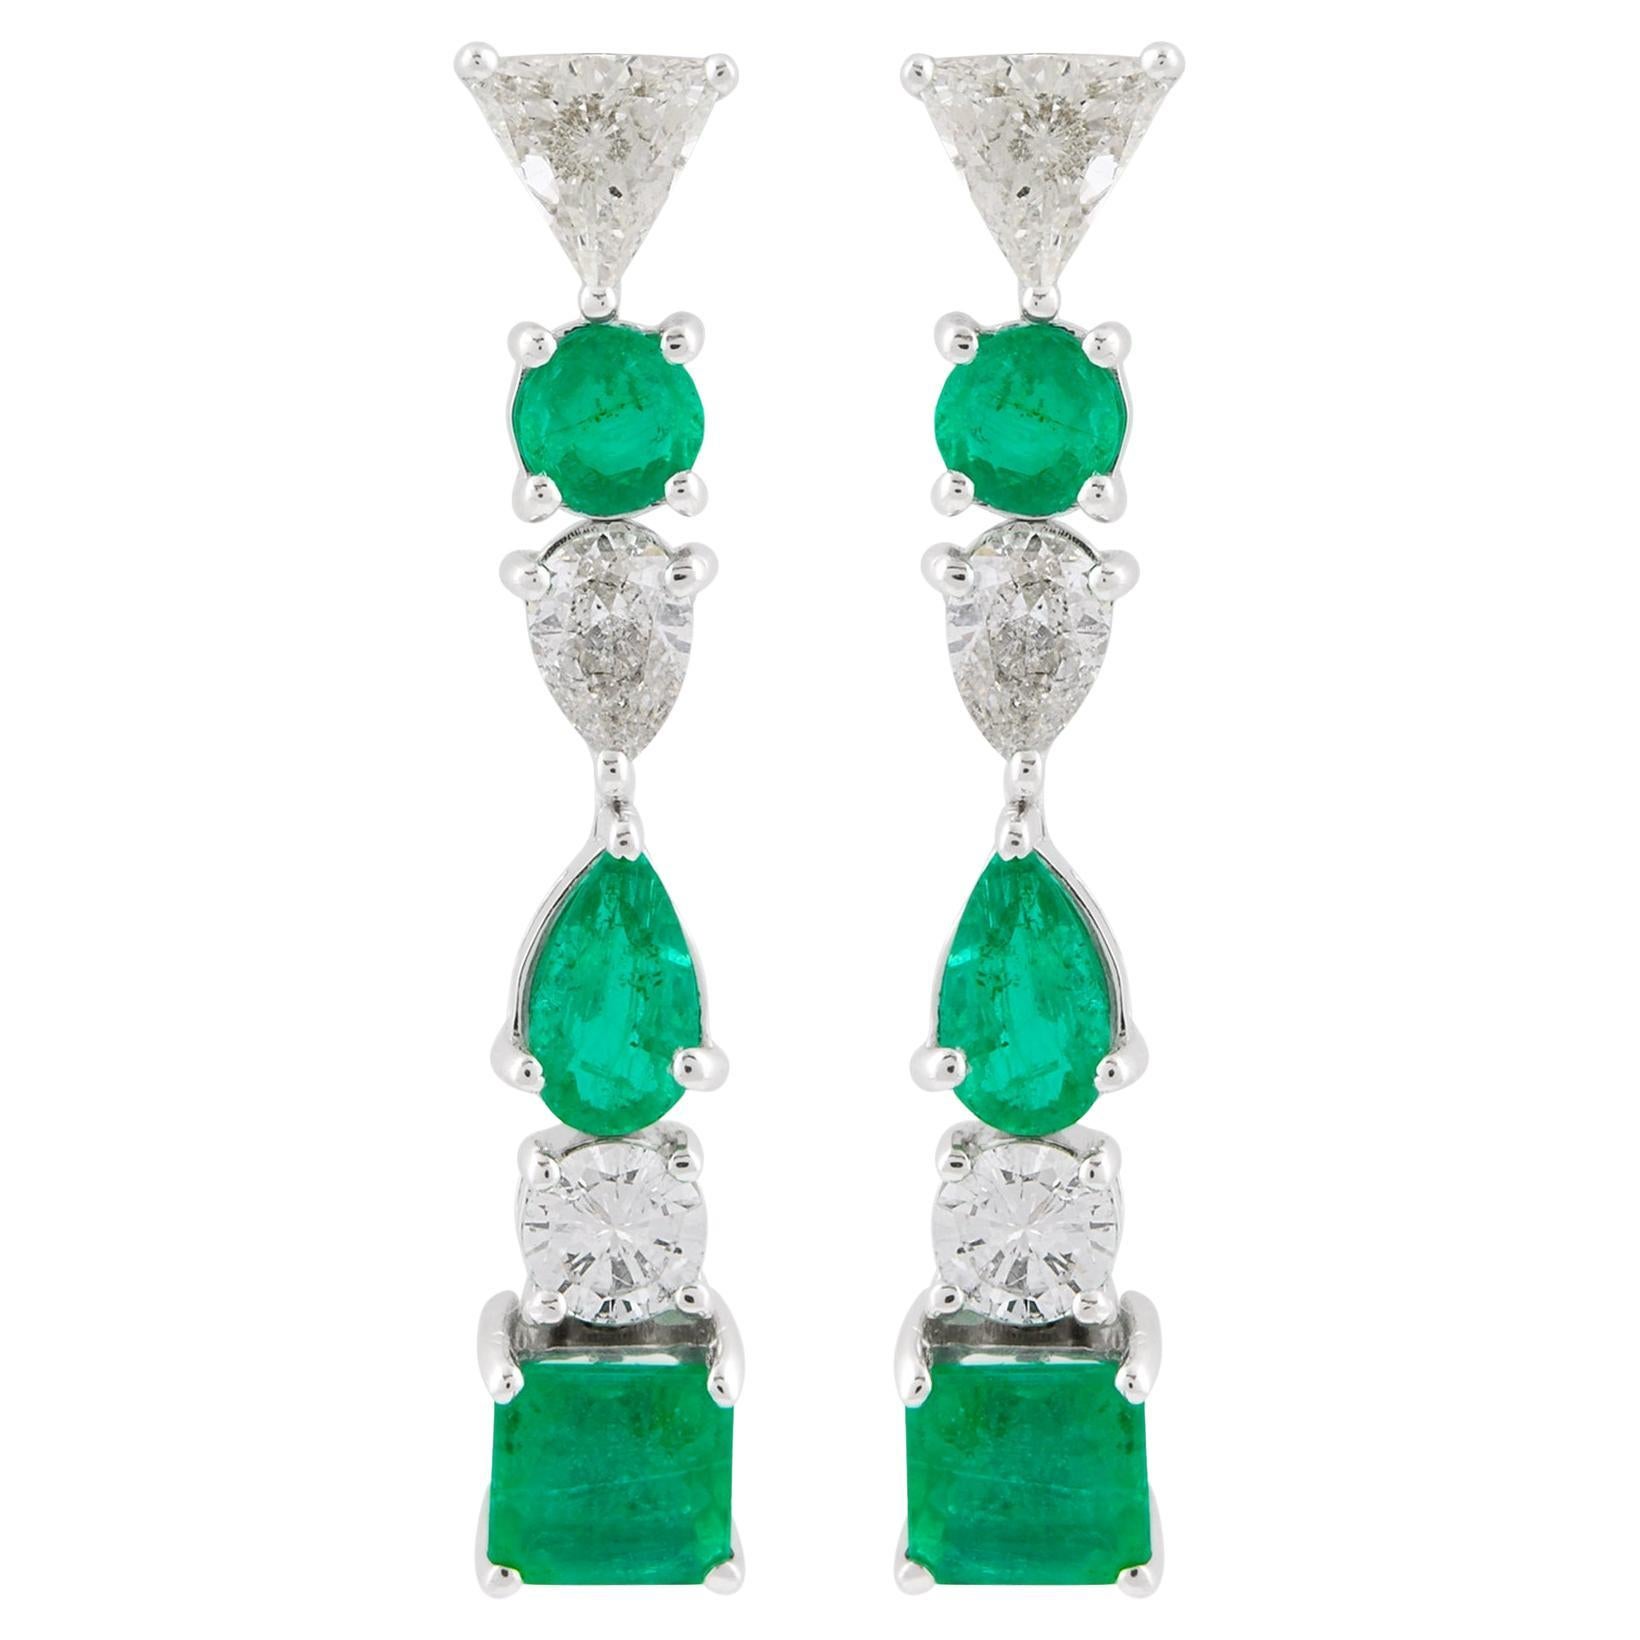 Item Code :- SEE-11788A
Gross Weight :- 5.22 gm
18k White Gold Weight :- 4.47 gm
Diamond Weight :- 1.35 carat  ( AVERAGE DIAMOND CLARITY SI1-SI2 & COLOR H-I )
Emerald Weight :- 2.40 carat
Earrings Length :- 31 mm approx.

✦